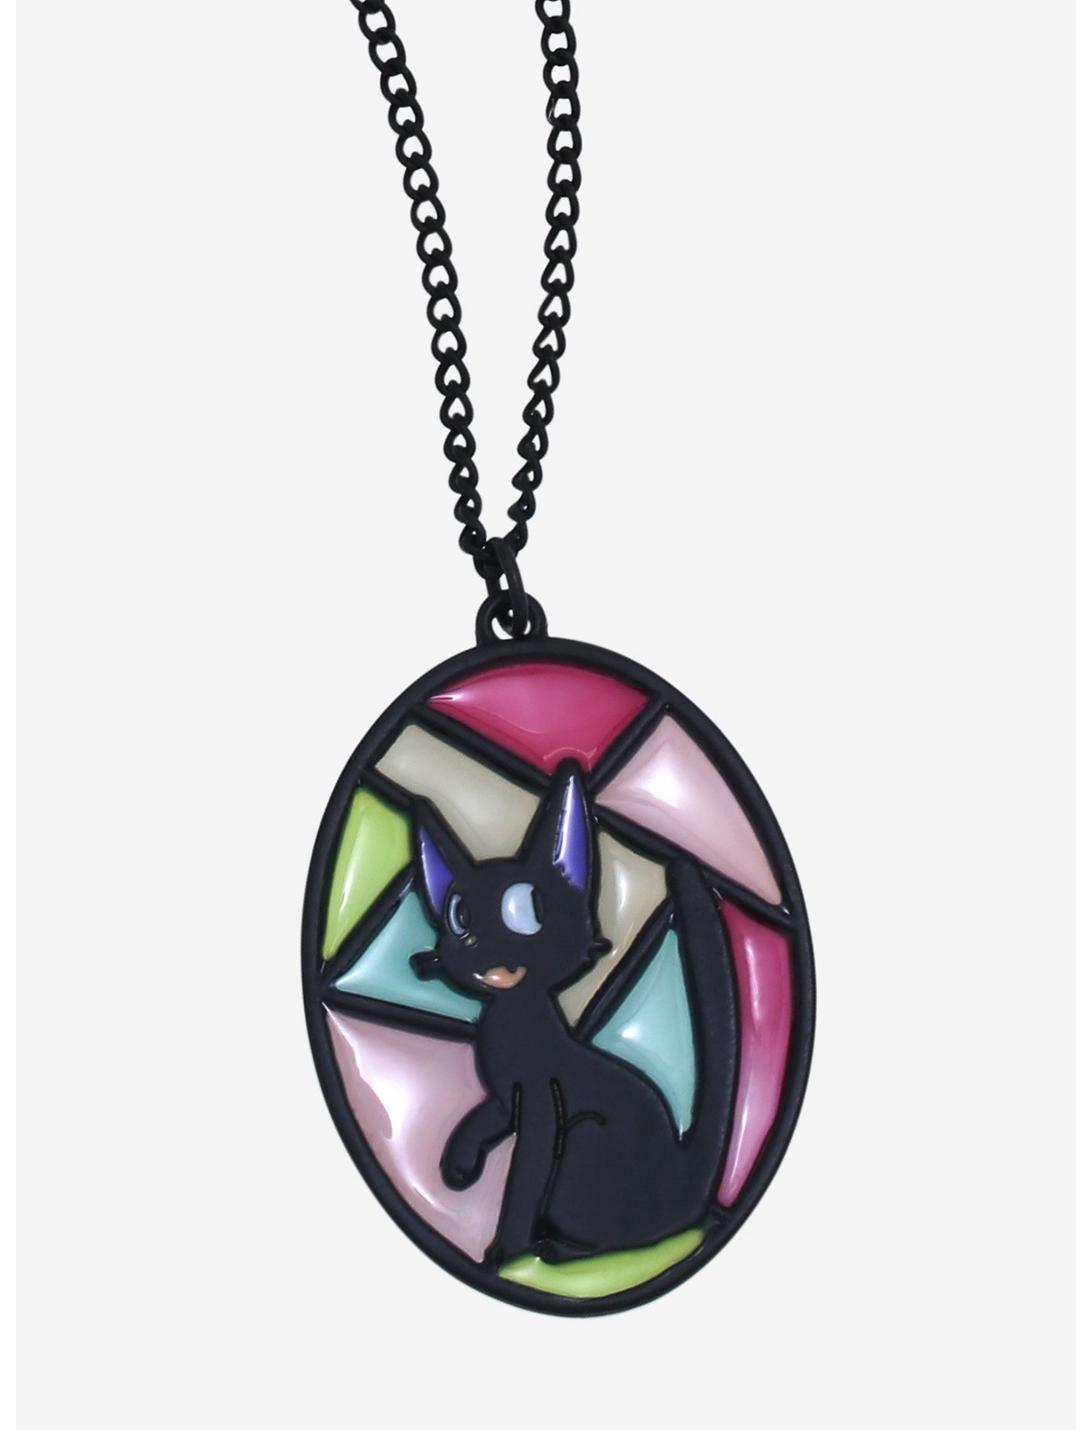 Studio Ghibli Kiki’s Delivery Service Jiji Stained Glass Necklace - BoxLunch Exclusive , , hi-res